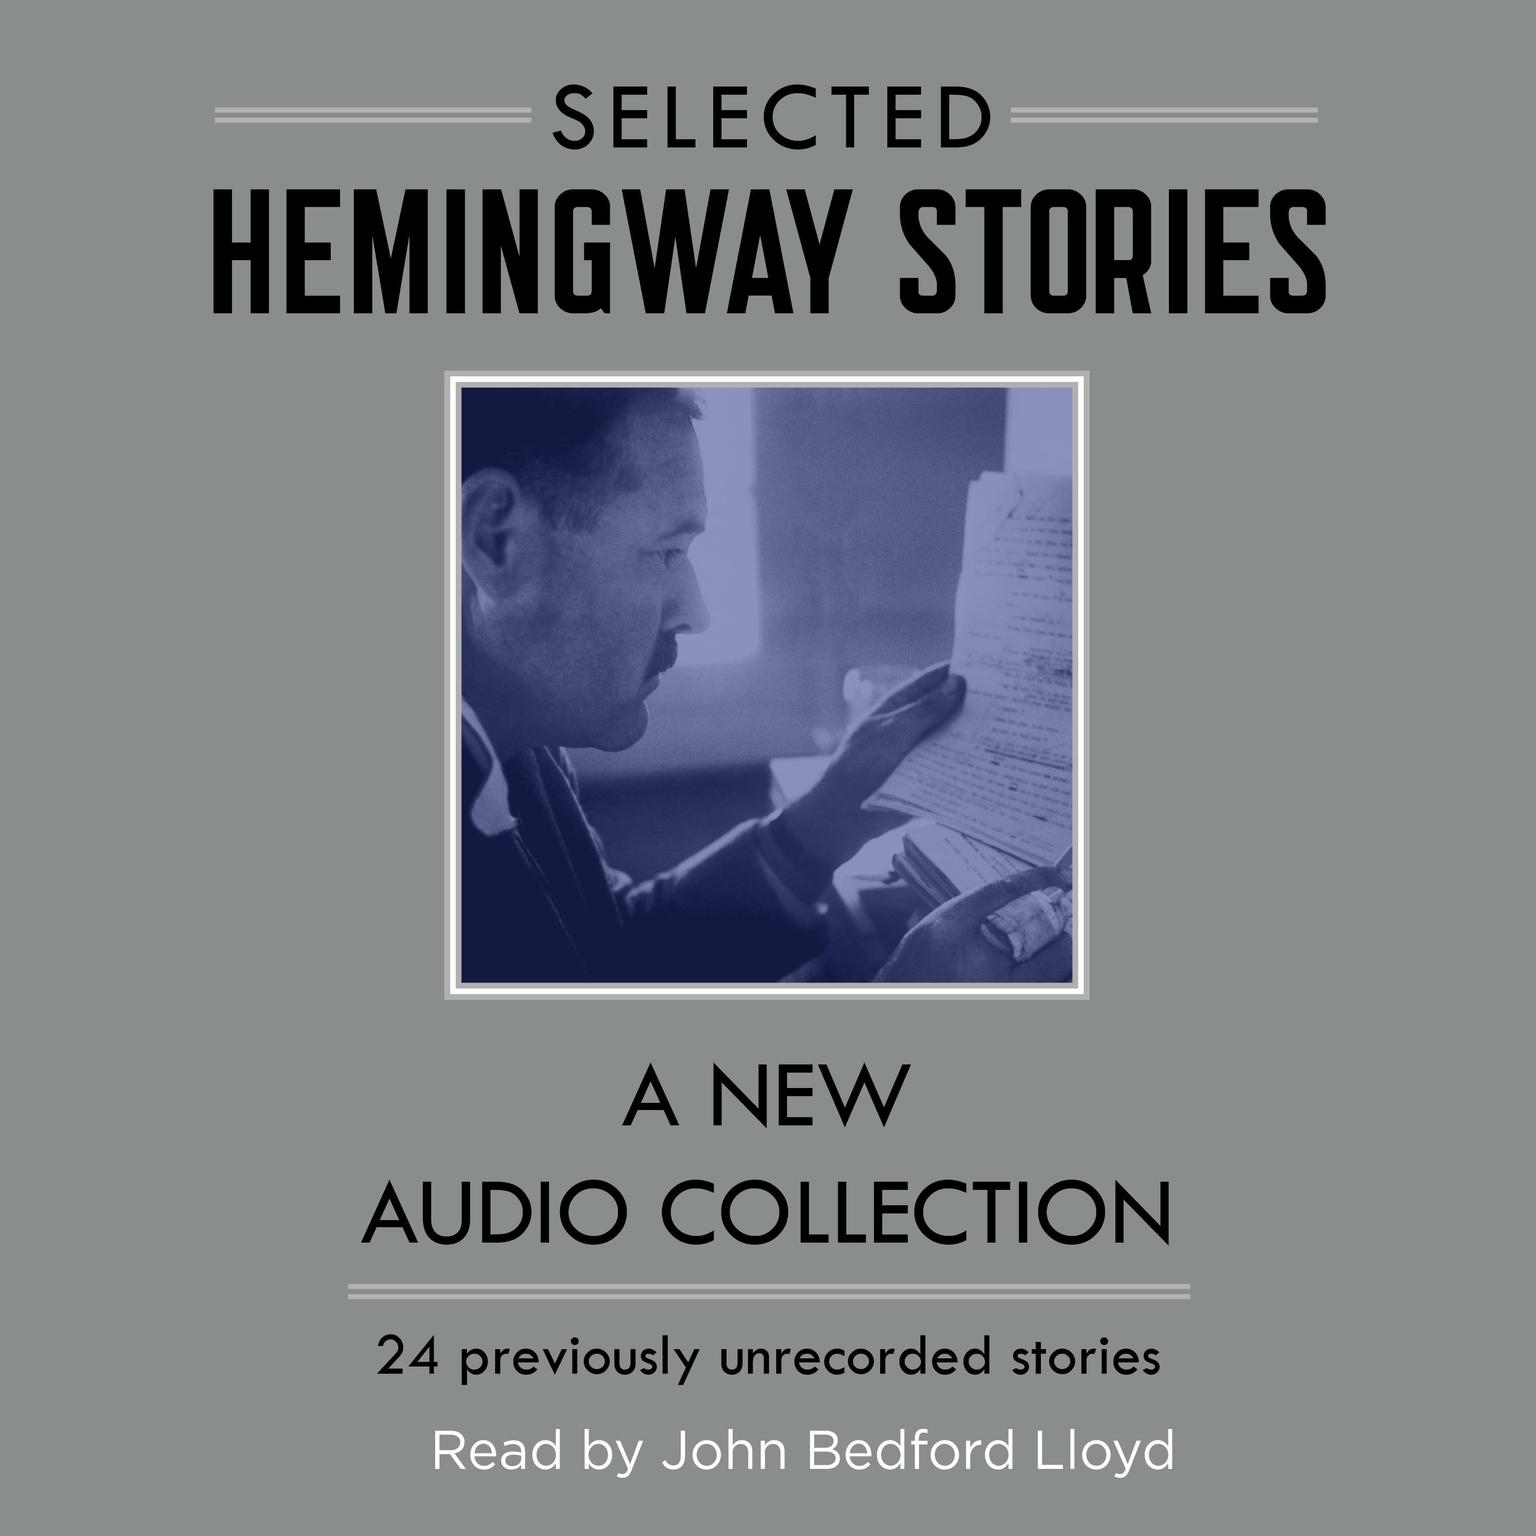 Hemingway Stories: A New Audio Collection Audiobook, by Ernest Hemingway